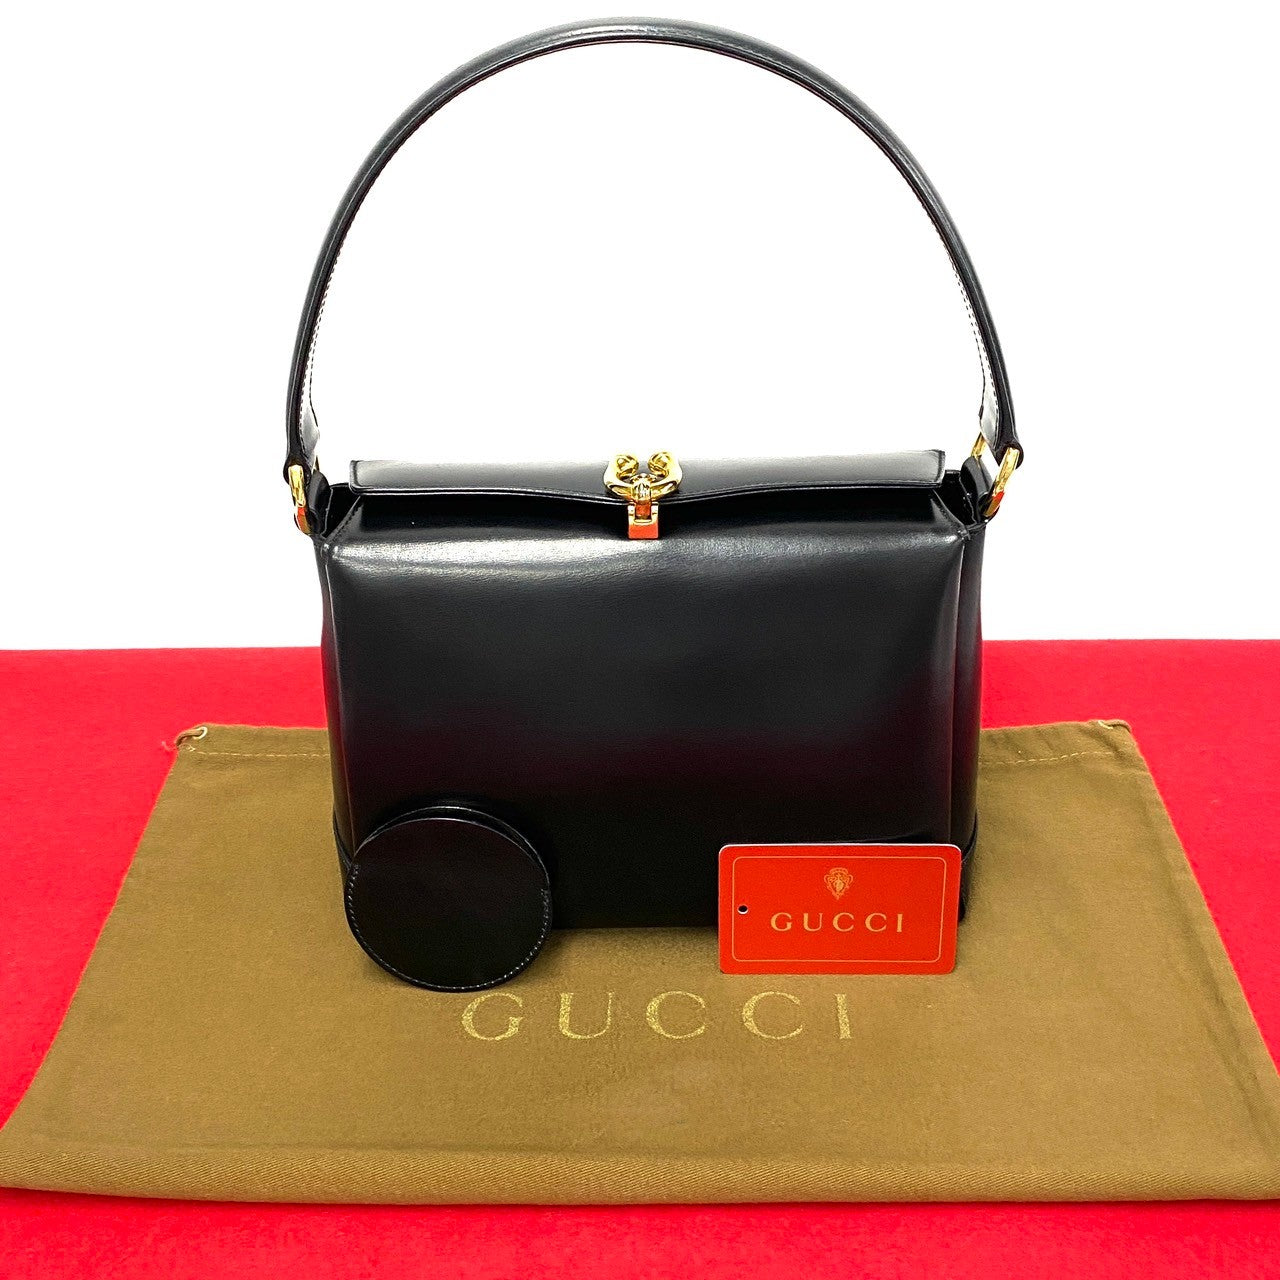 Gucci Glossy Leather G Logo Top Handle Bag Leather Handbag in Excellent condition